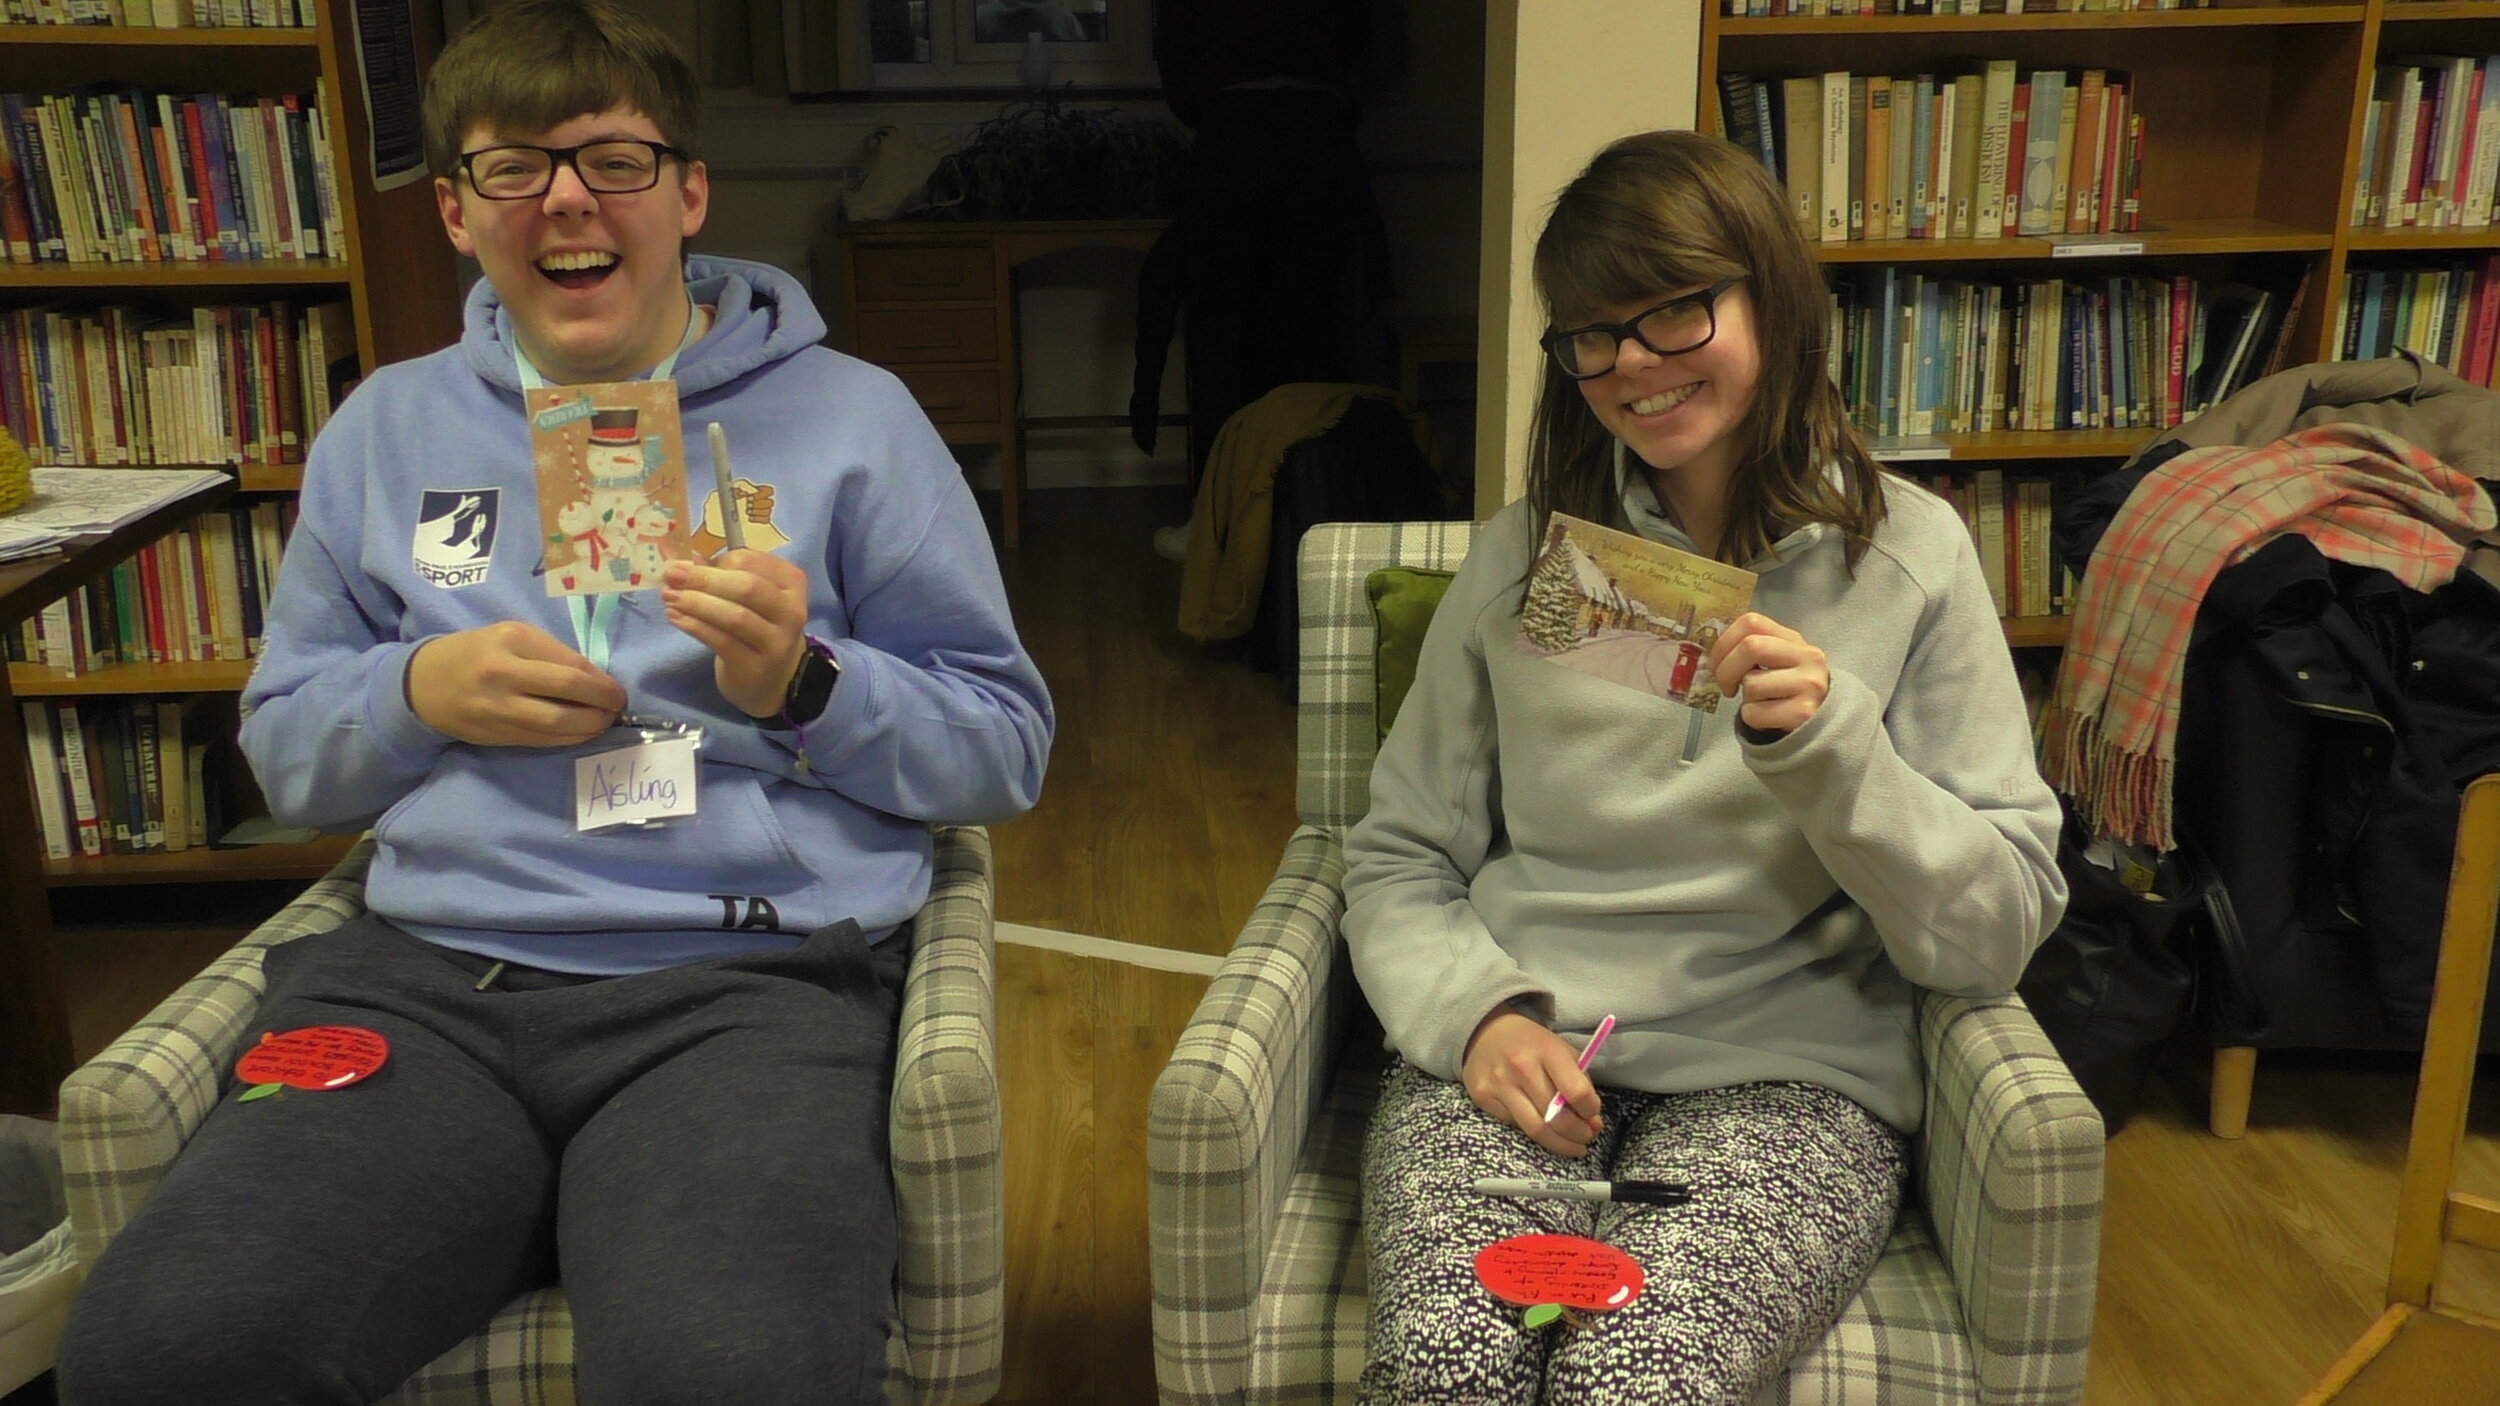 Orla and Tom with cards.JPG